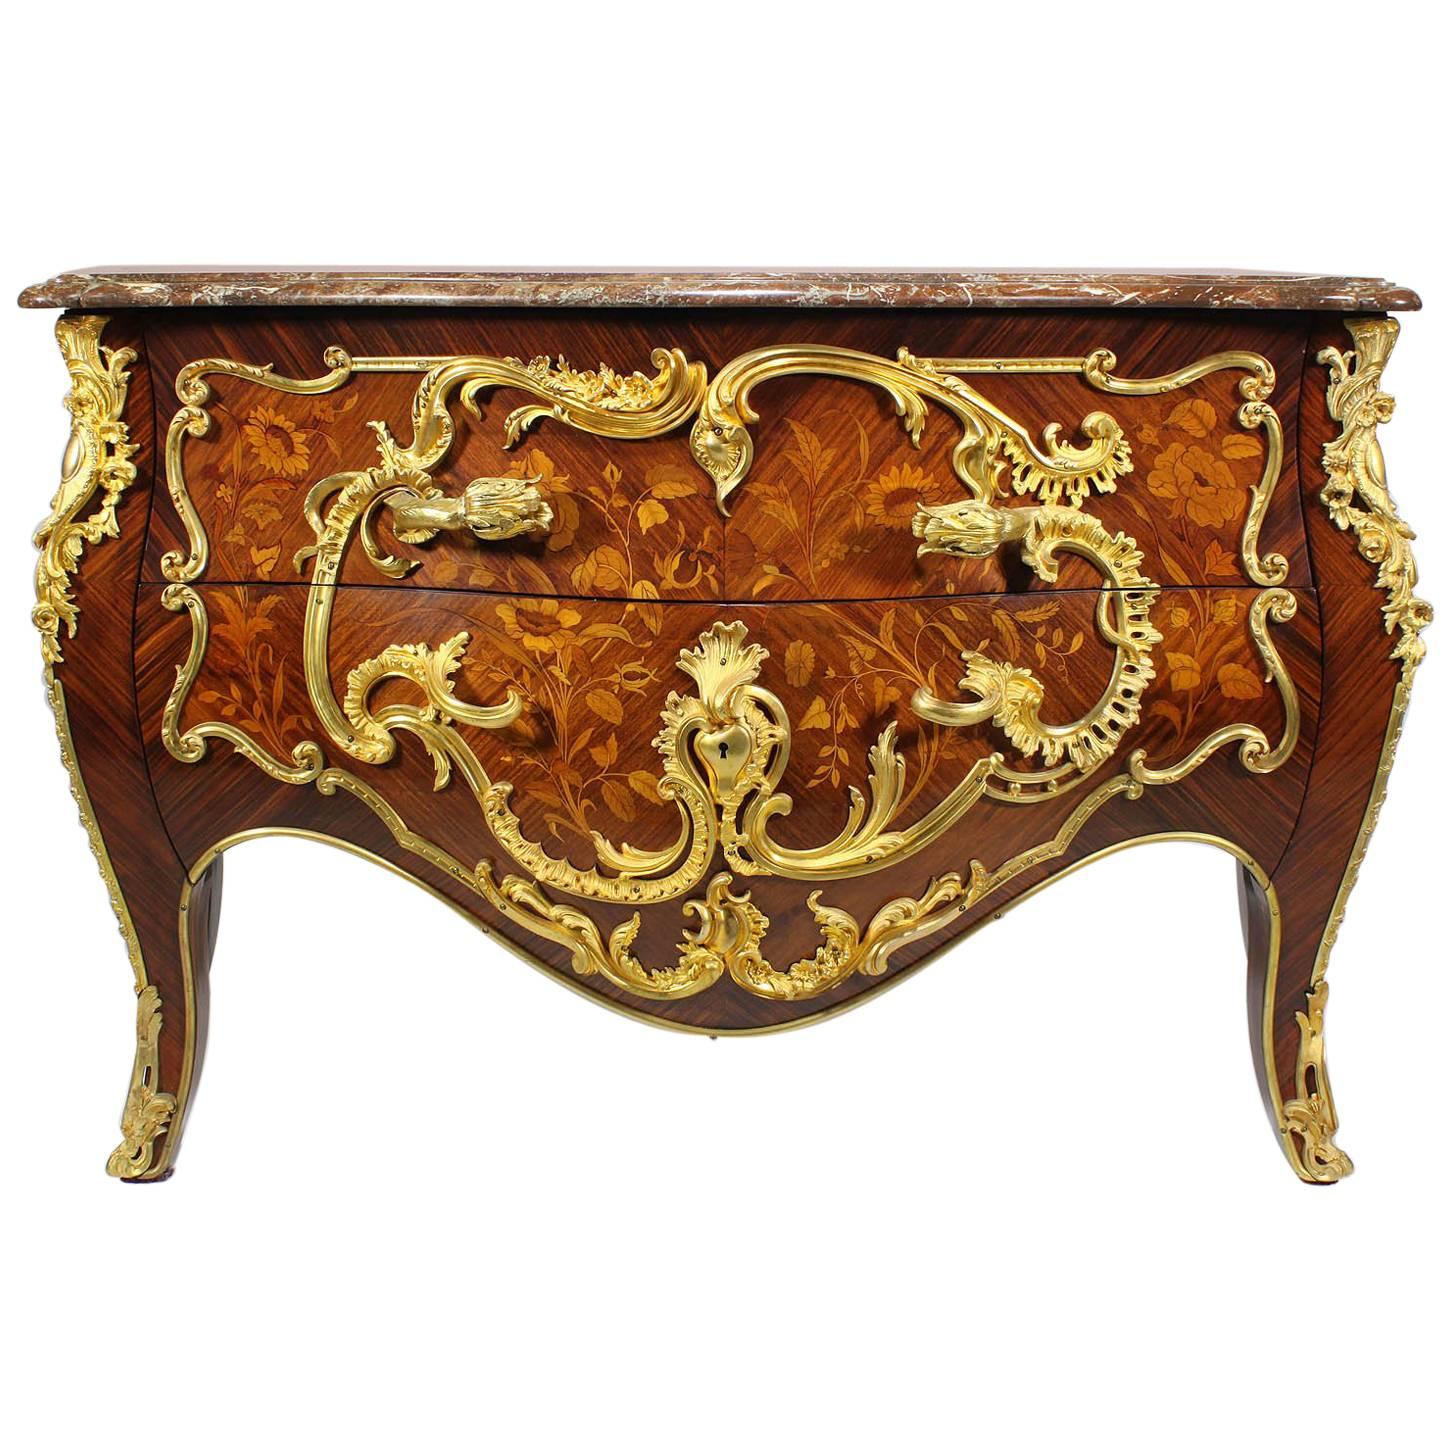 French, 19th Century, Louis XV Style Gilt Bronze-Mounted and Marquetry Commode For Sale